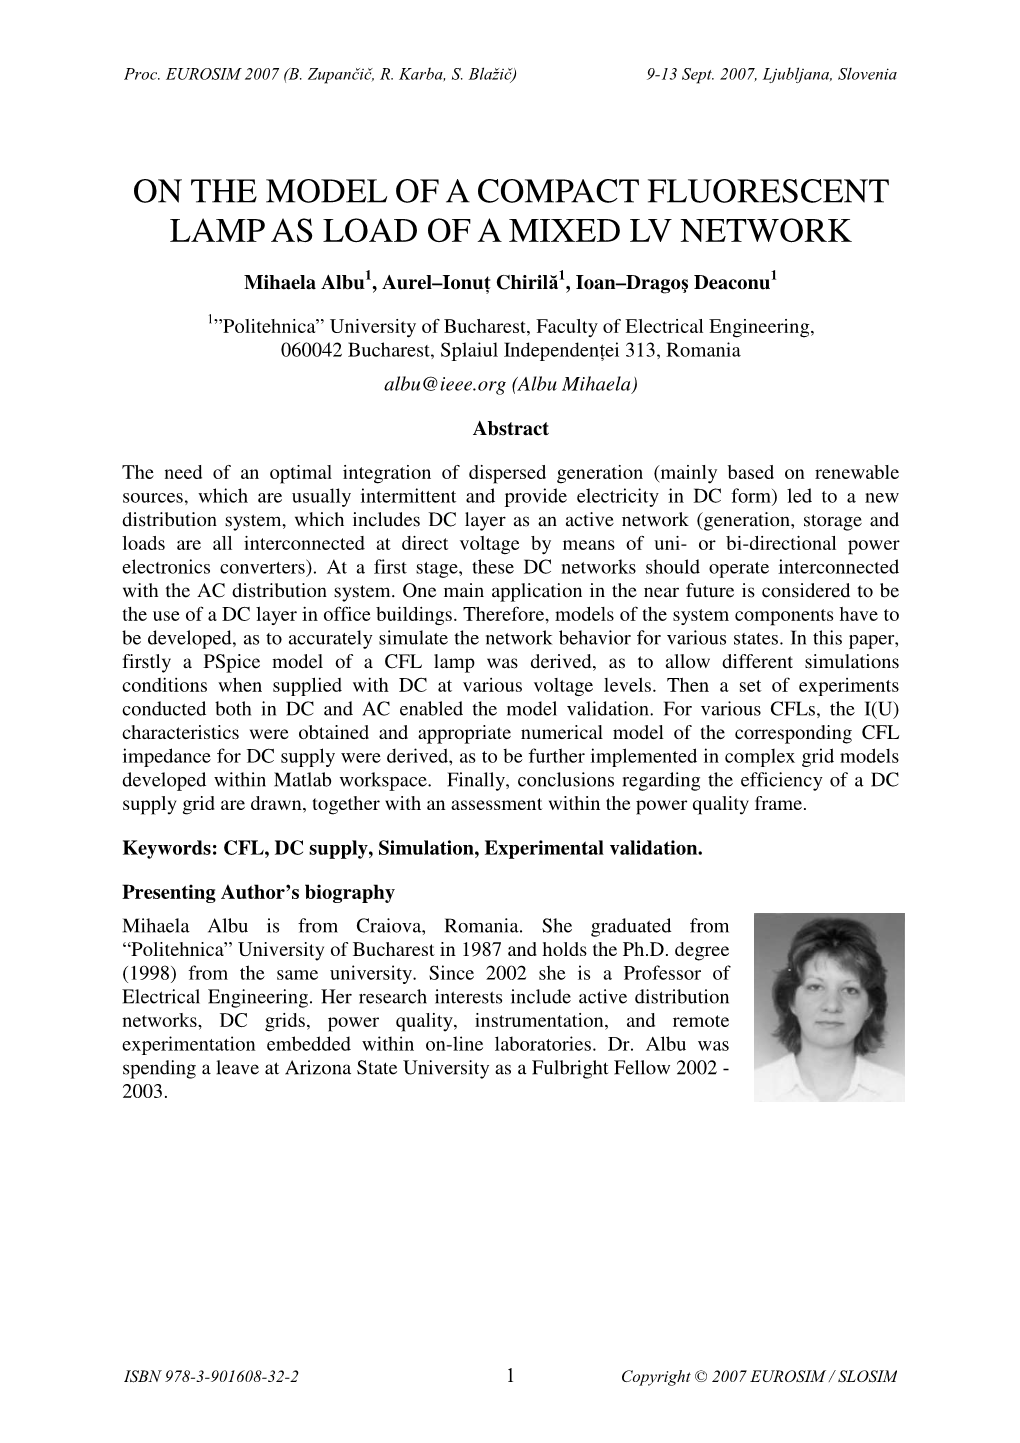 On the Model of a Compact Fluorescent Lamp As Load of a Mixed Lv Network